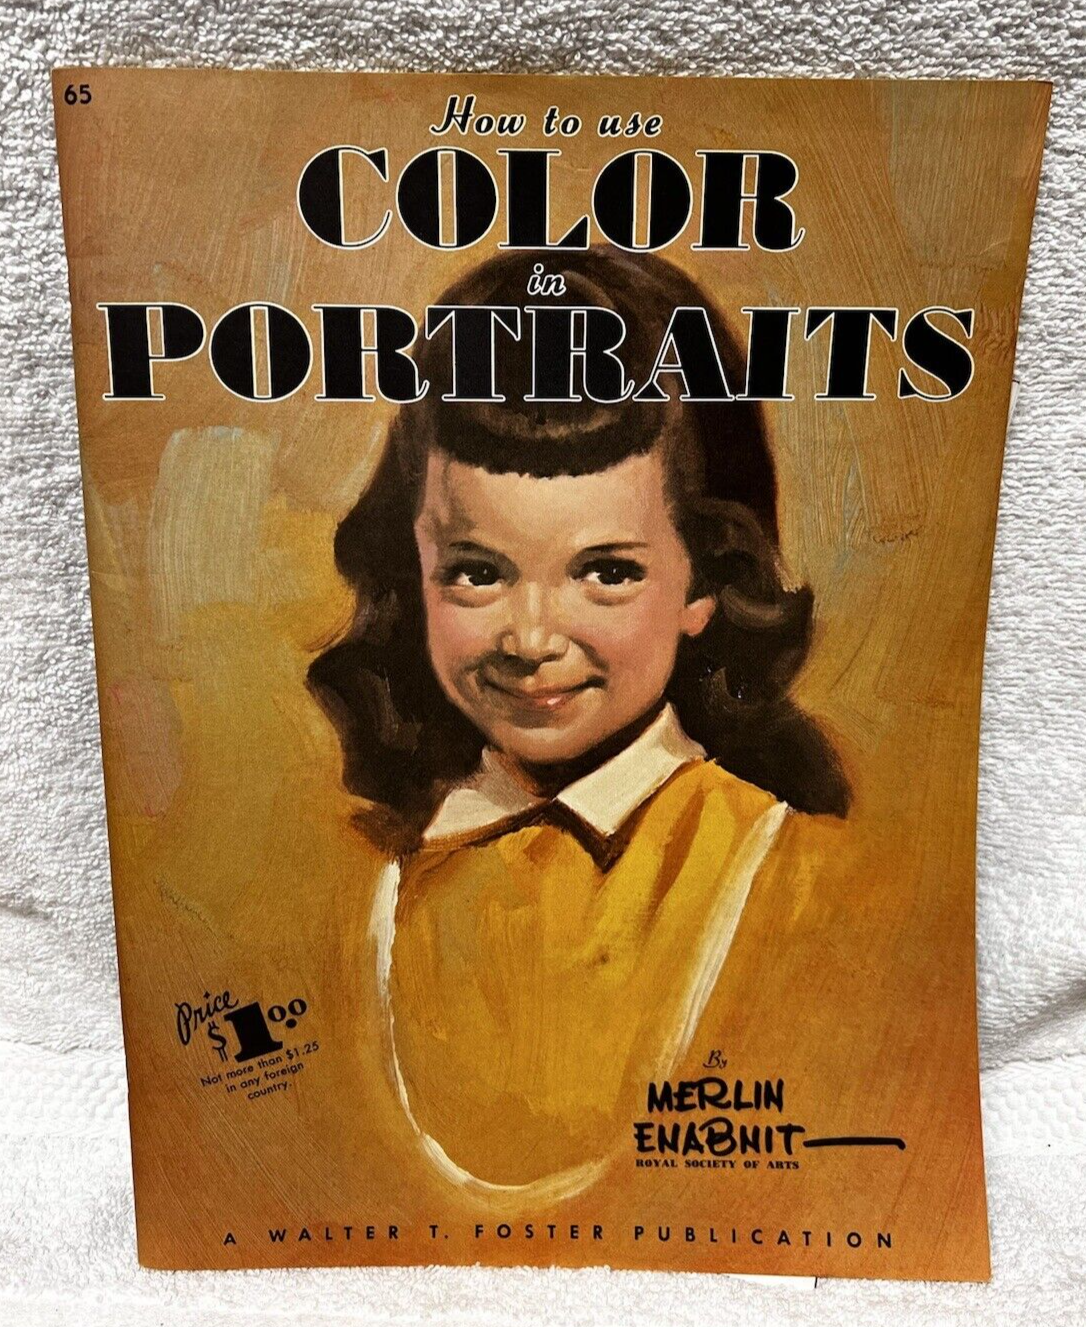 How to Draw Book Walter T Foster How to Color Portraits by Merlin Enabnit #65 - $4.95